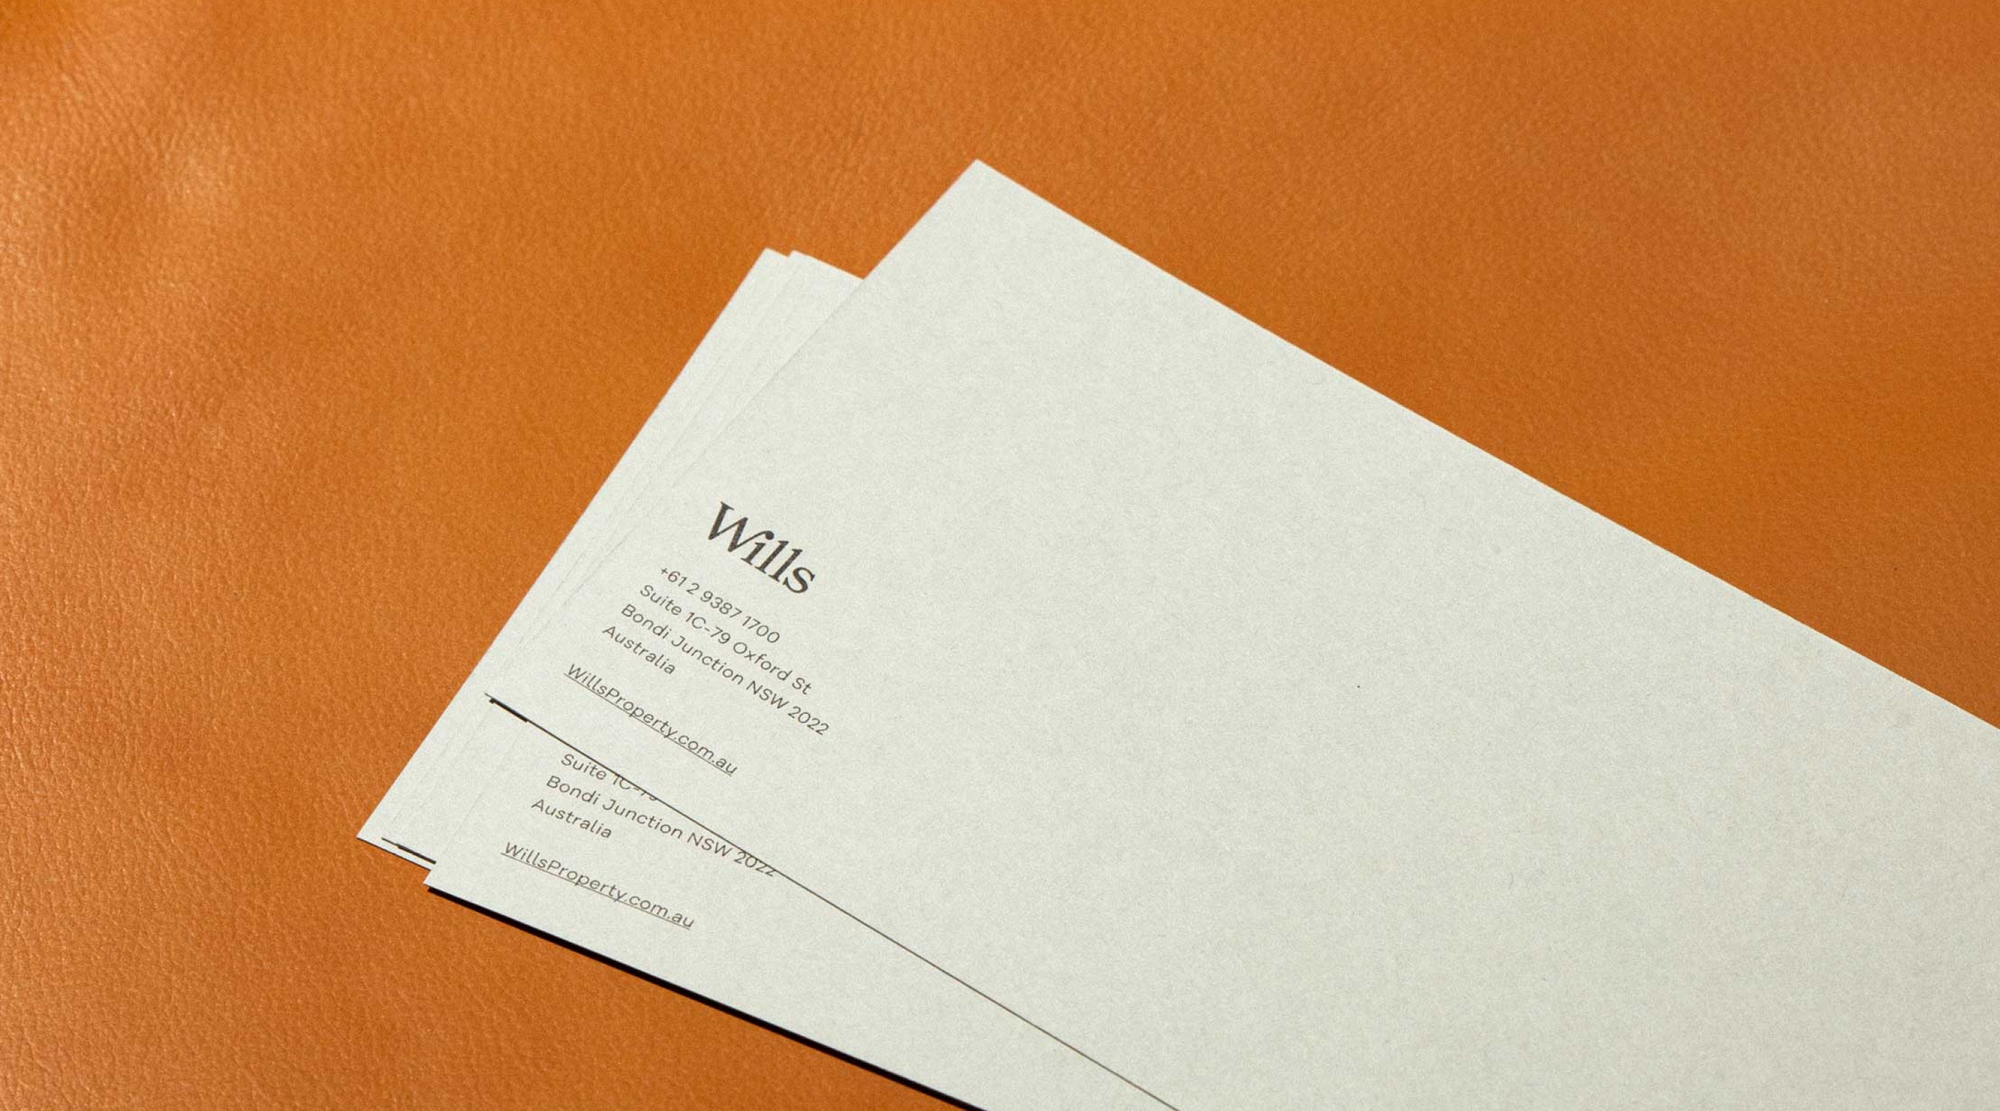 Wills Property - DL Flyer Printed Card Logo and address - Brand Strategy | Atollon - a design company